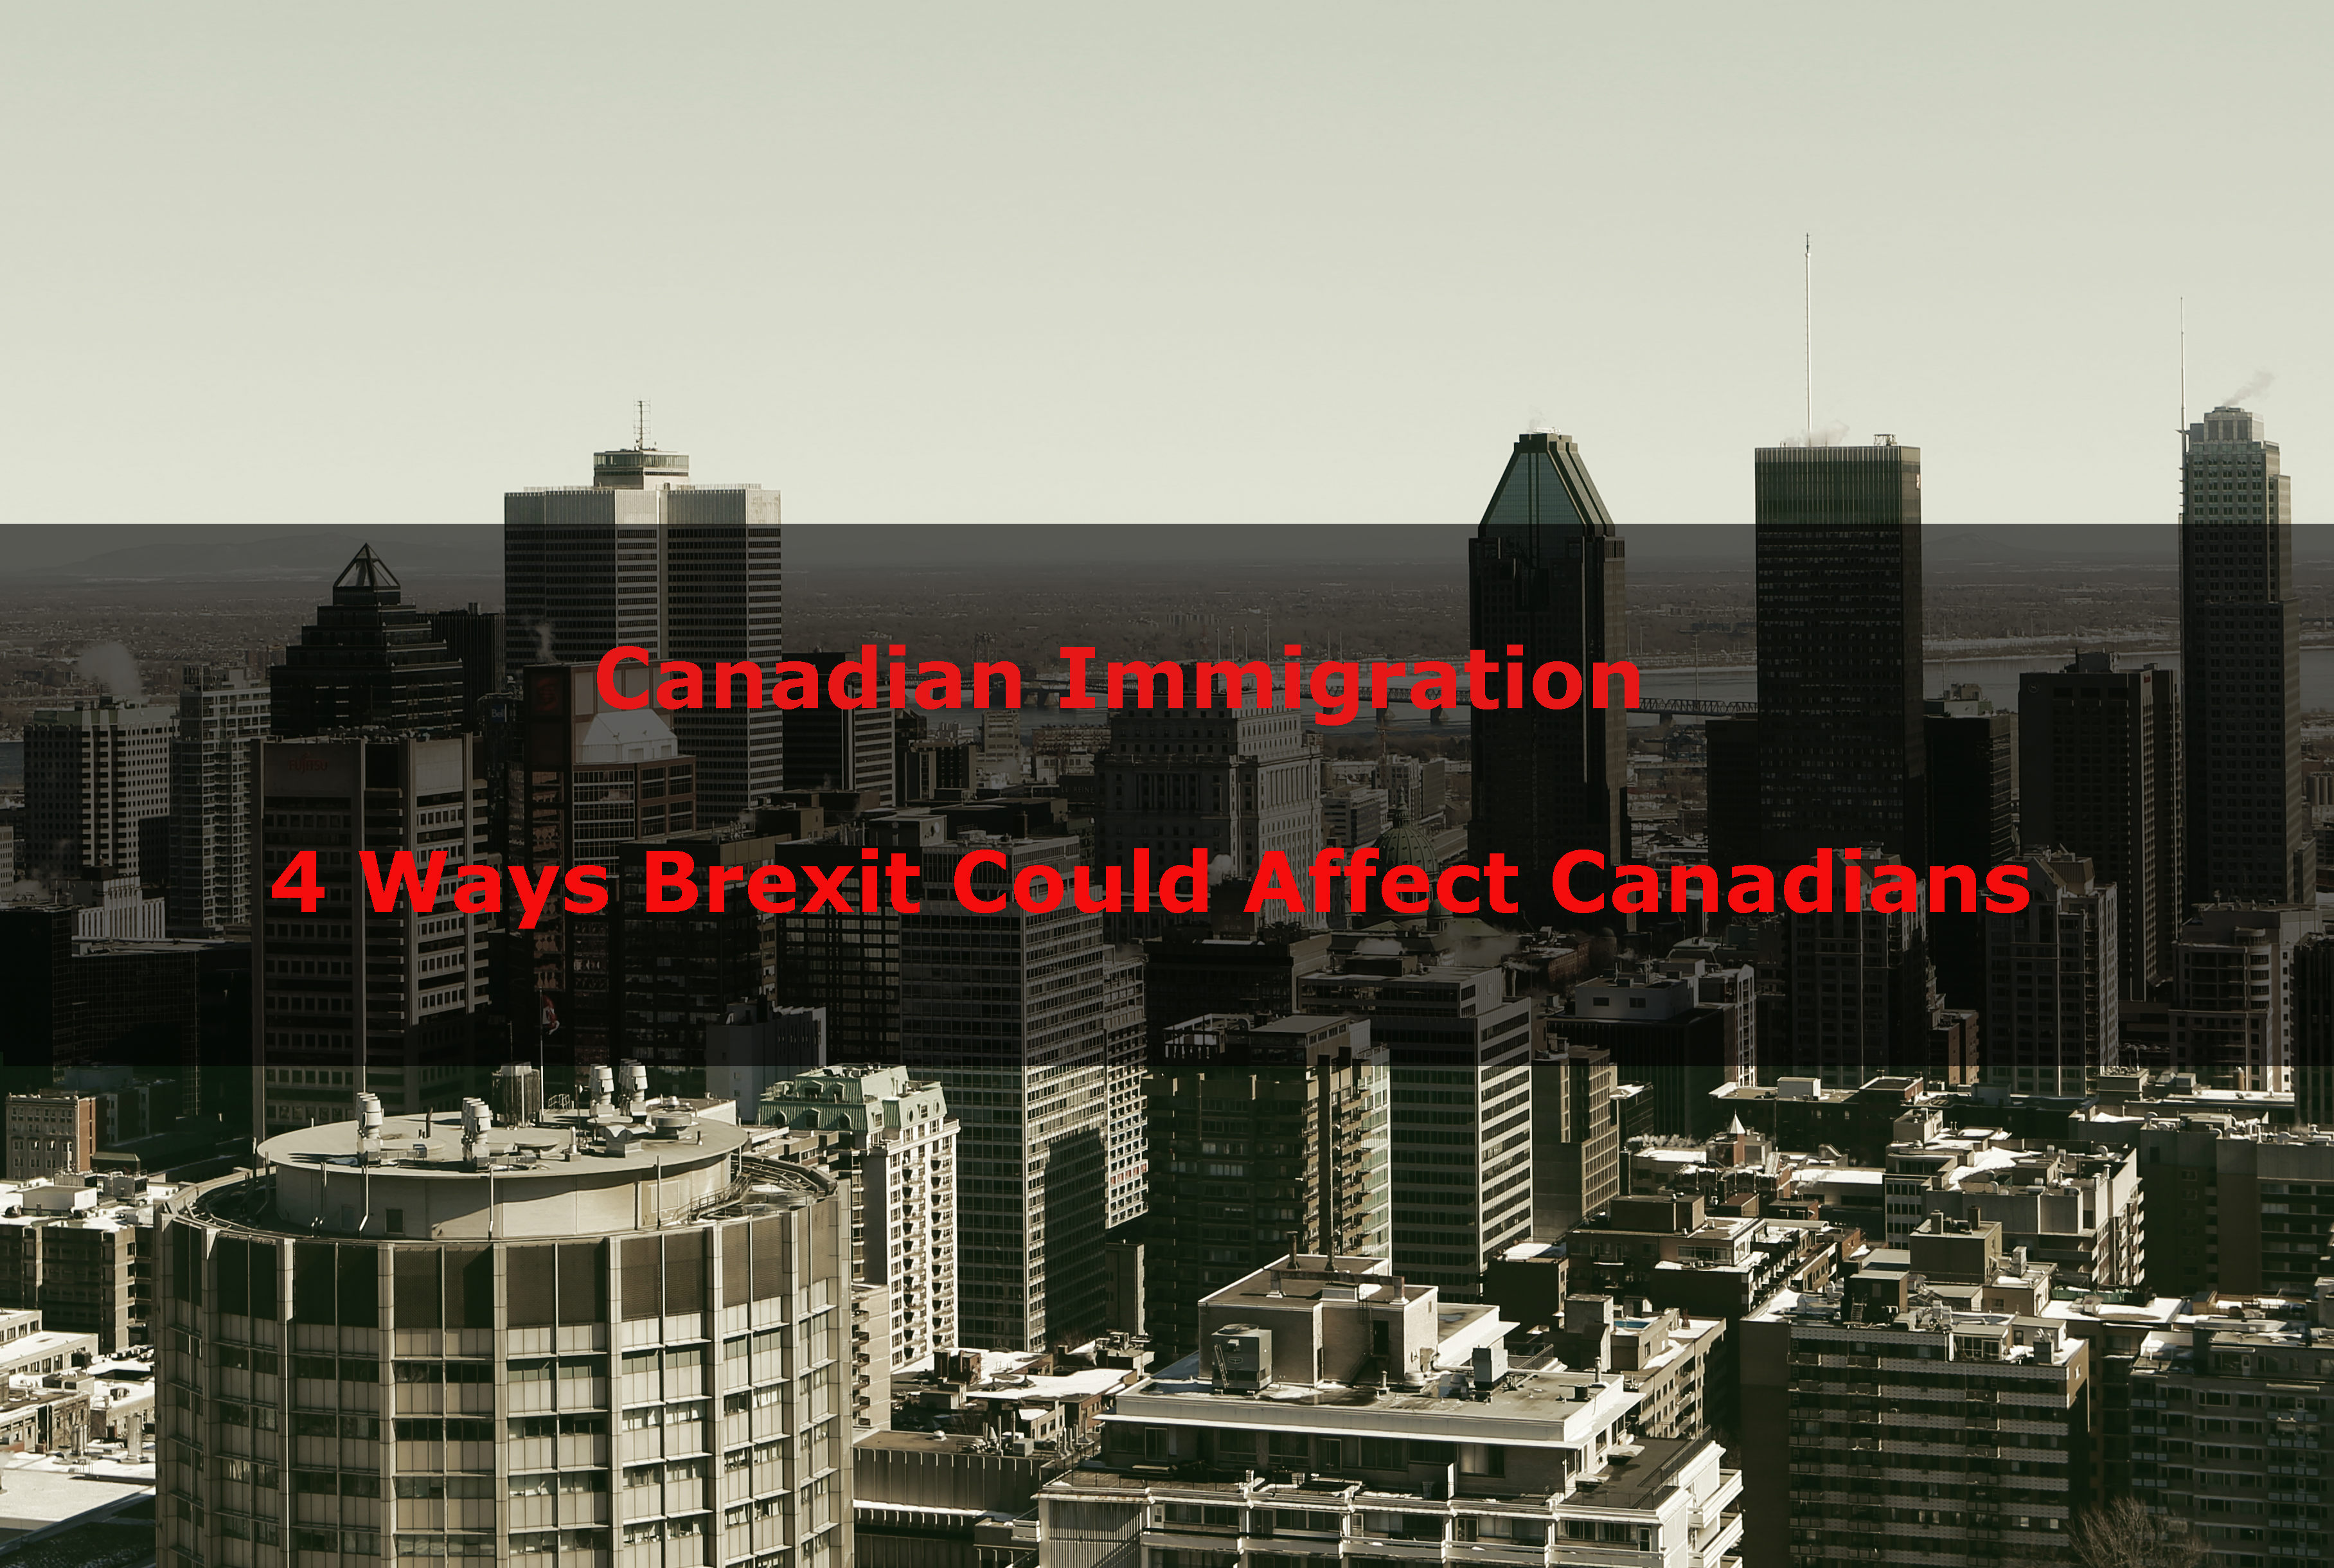 Canadian Immigration: 4 Ways Brexit Could Affect Canadians